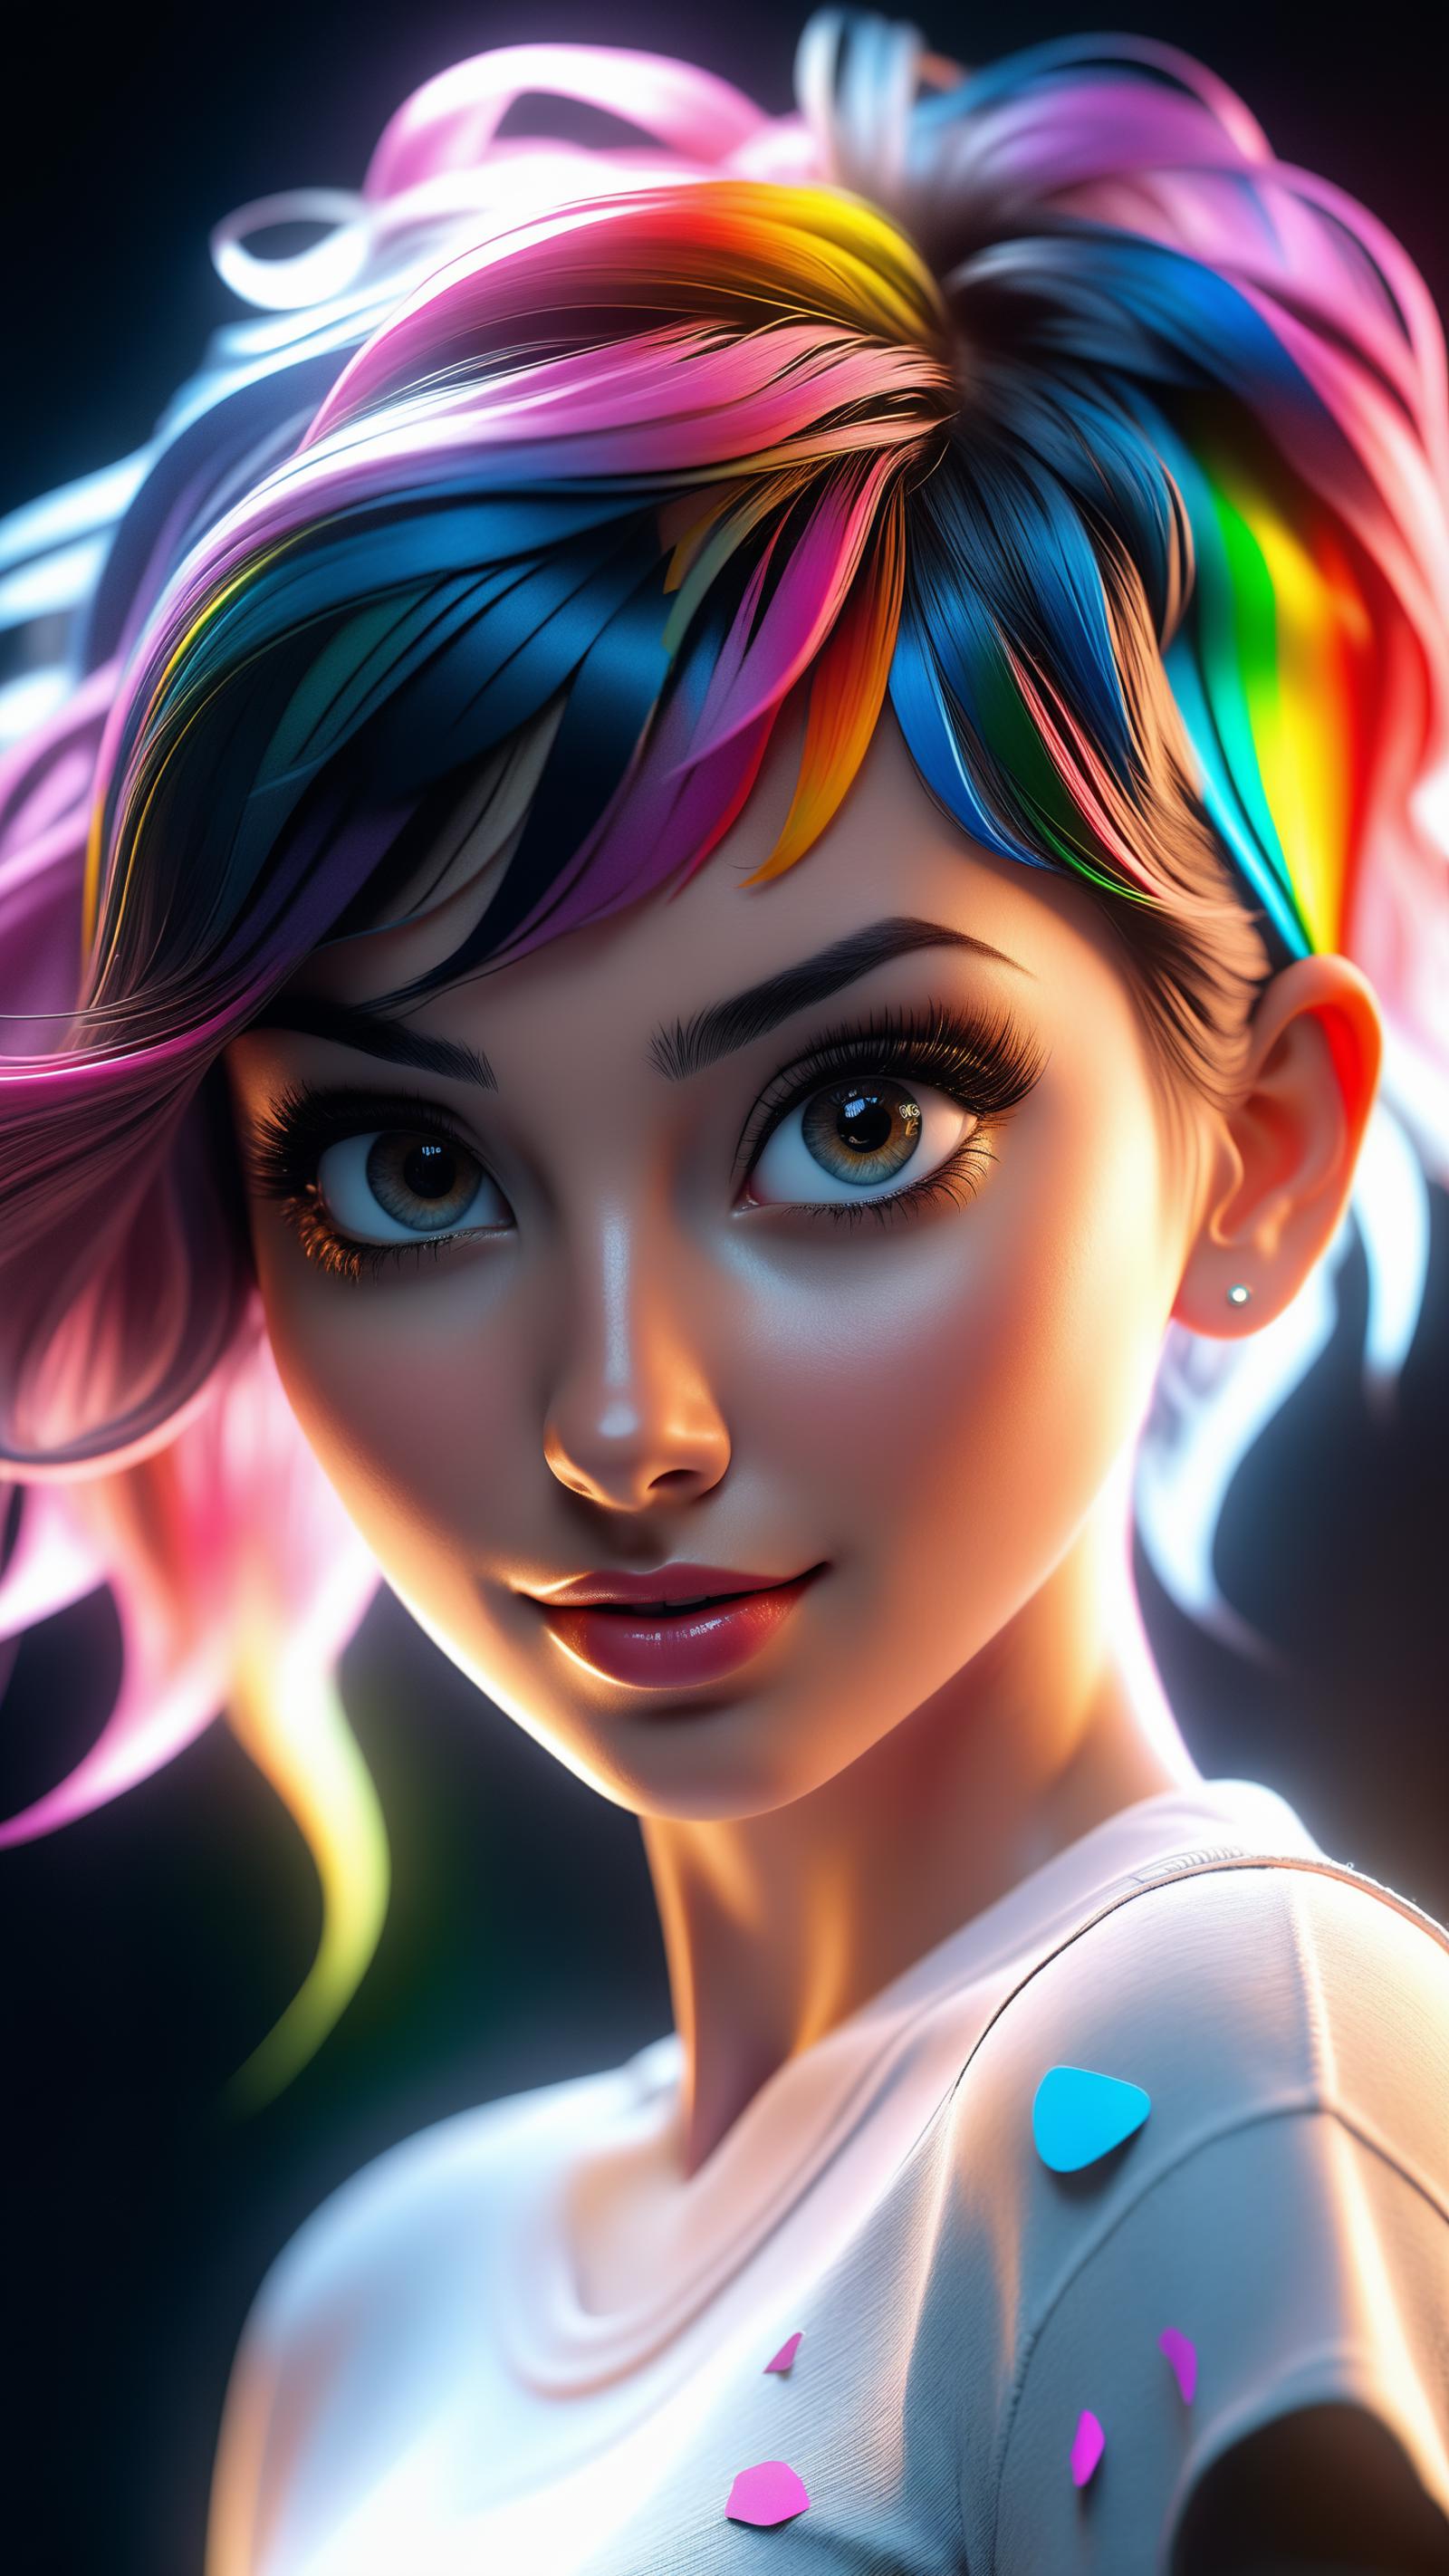 A colorful digital painting of a woman with pink hair, blue eyes, and a white shirt.